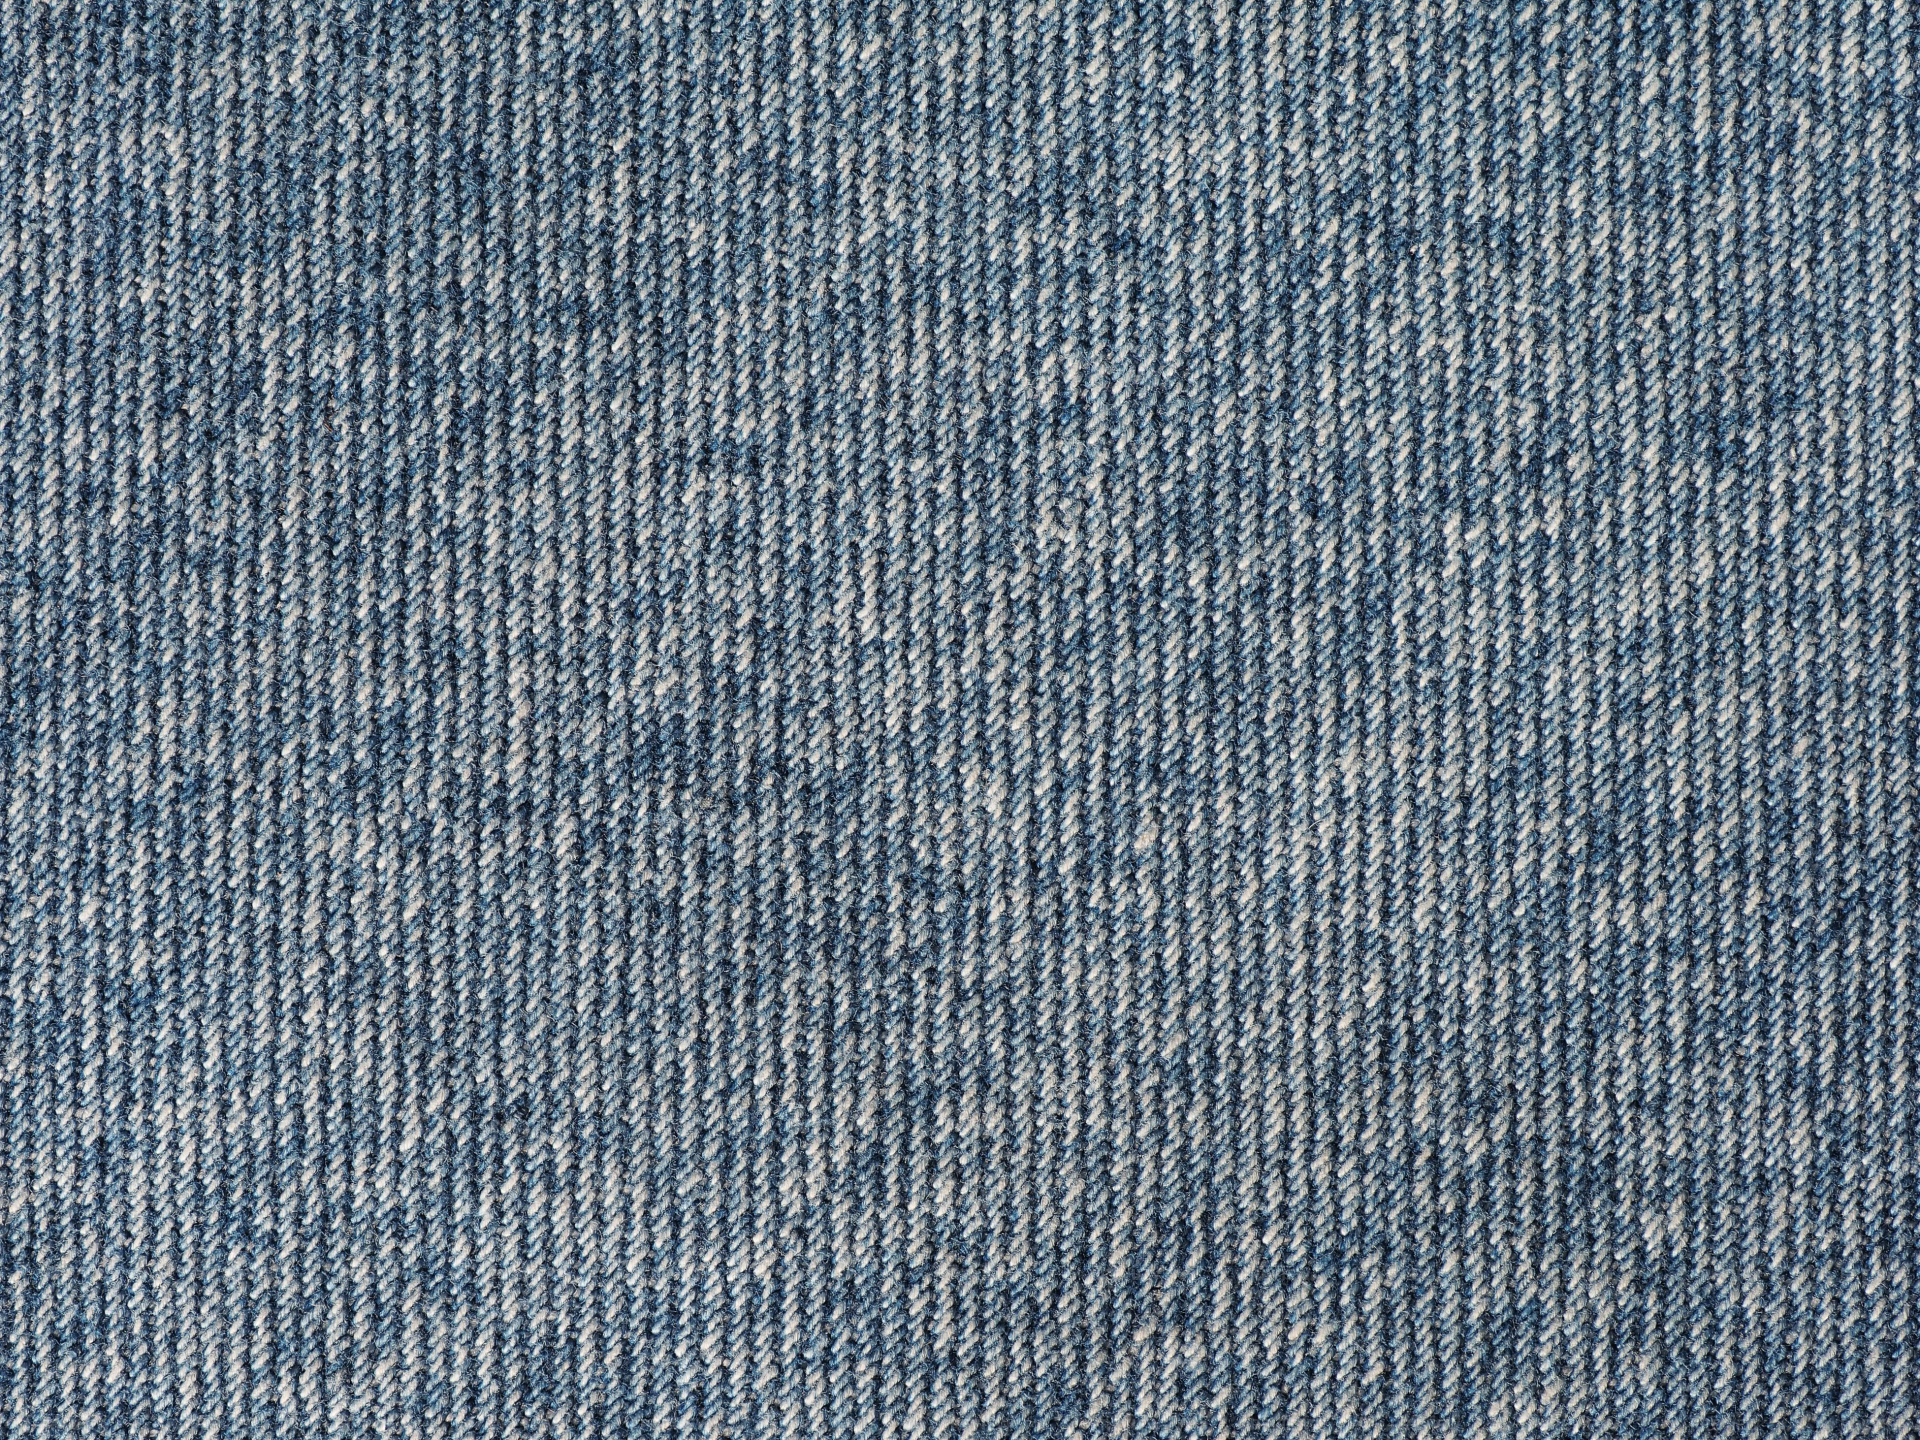 Denim Canvas Light Weight Fabric at Best Price in Delhi | Aa Canvas Company